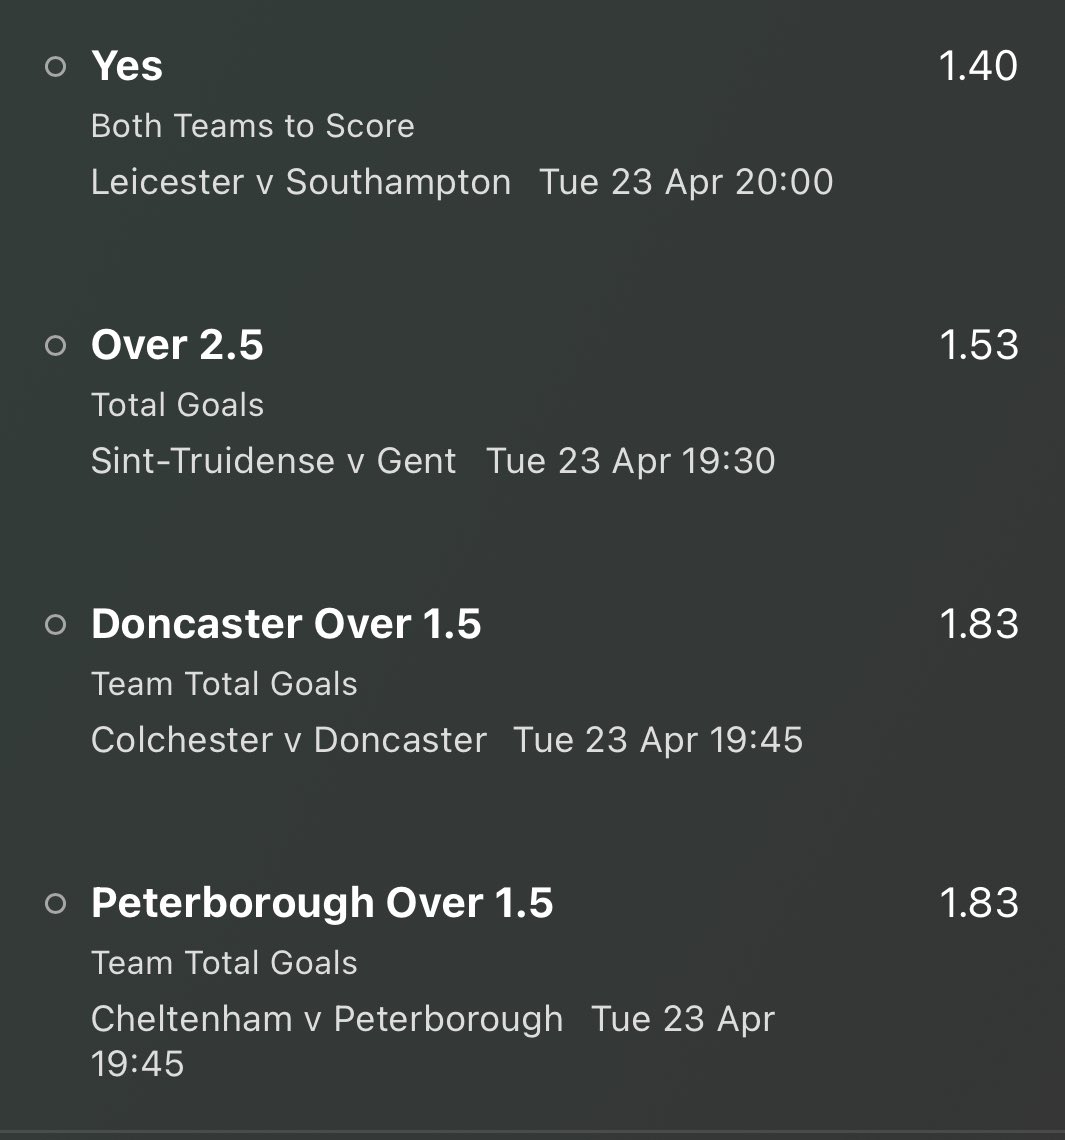 Mixed ACCA ⚽️

🏴󠁧󠁢󠁥󠁮󠁧󠁿🇧🇪🏴󠁧󠁢󠁥󠁮󠁧󠁿🏴󠁧󠁢󠁥󠁮󠁧󠁿

Odds 7.21 💸